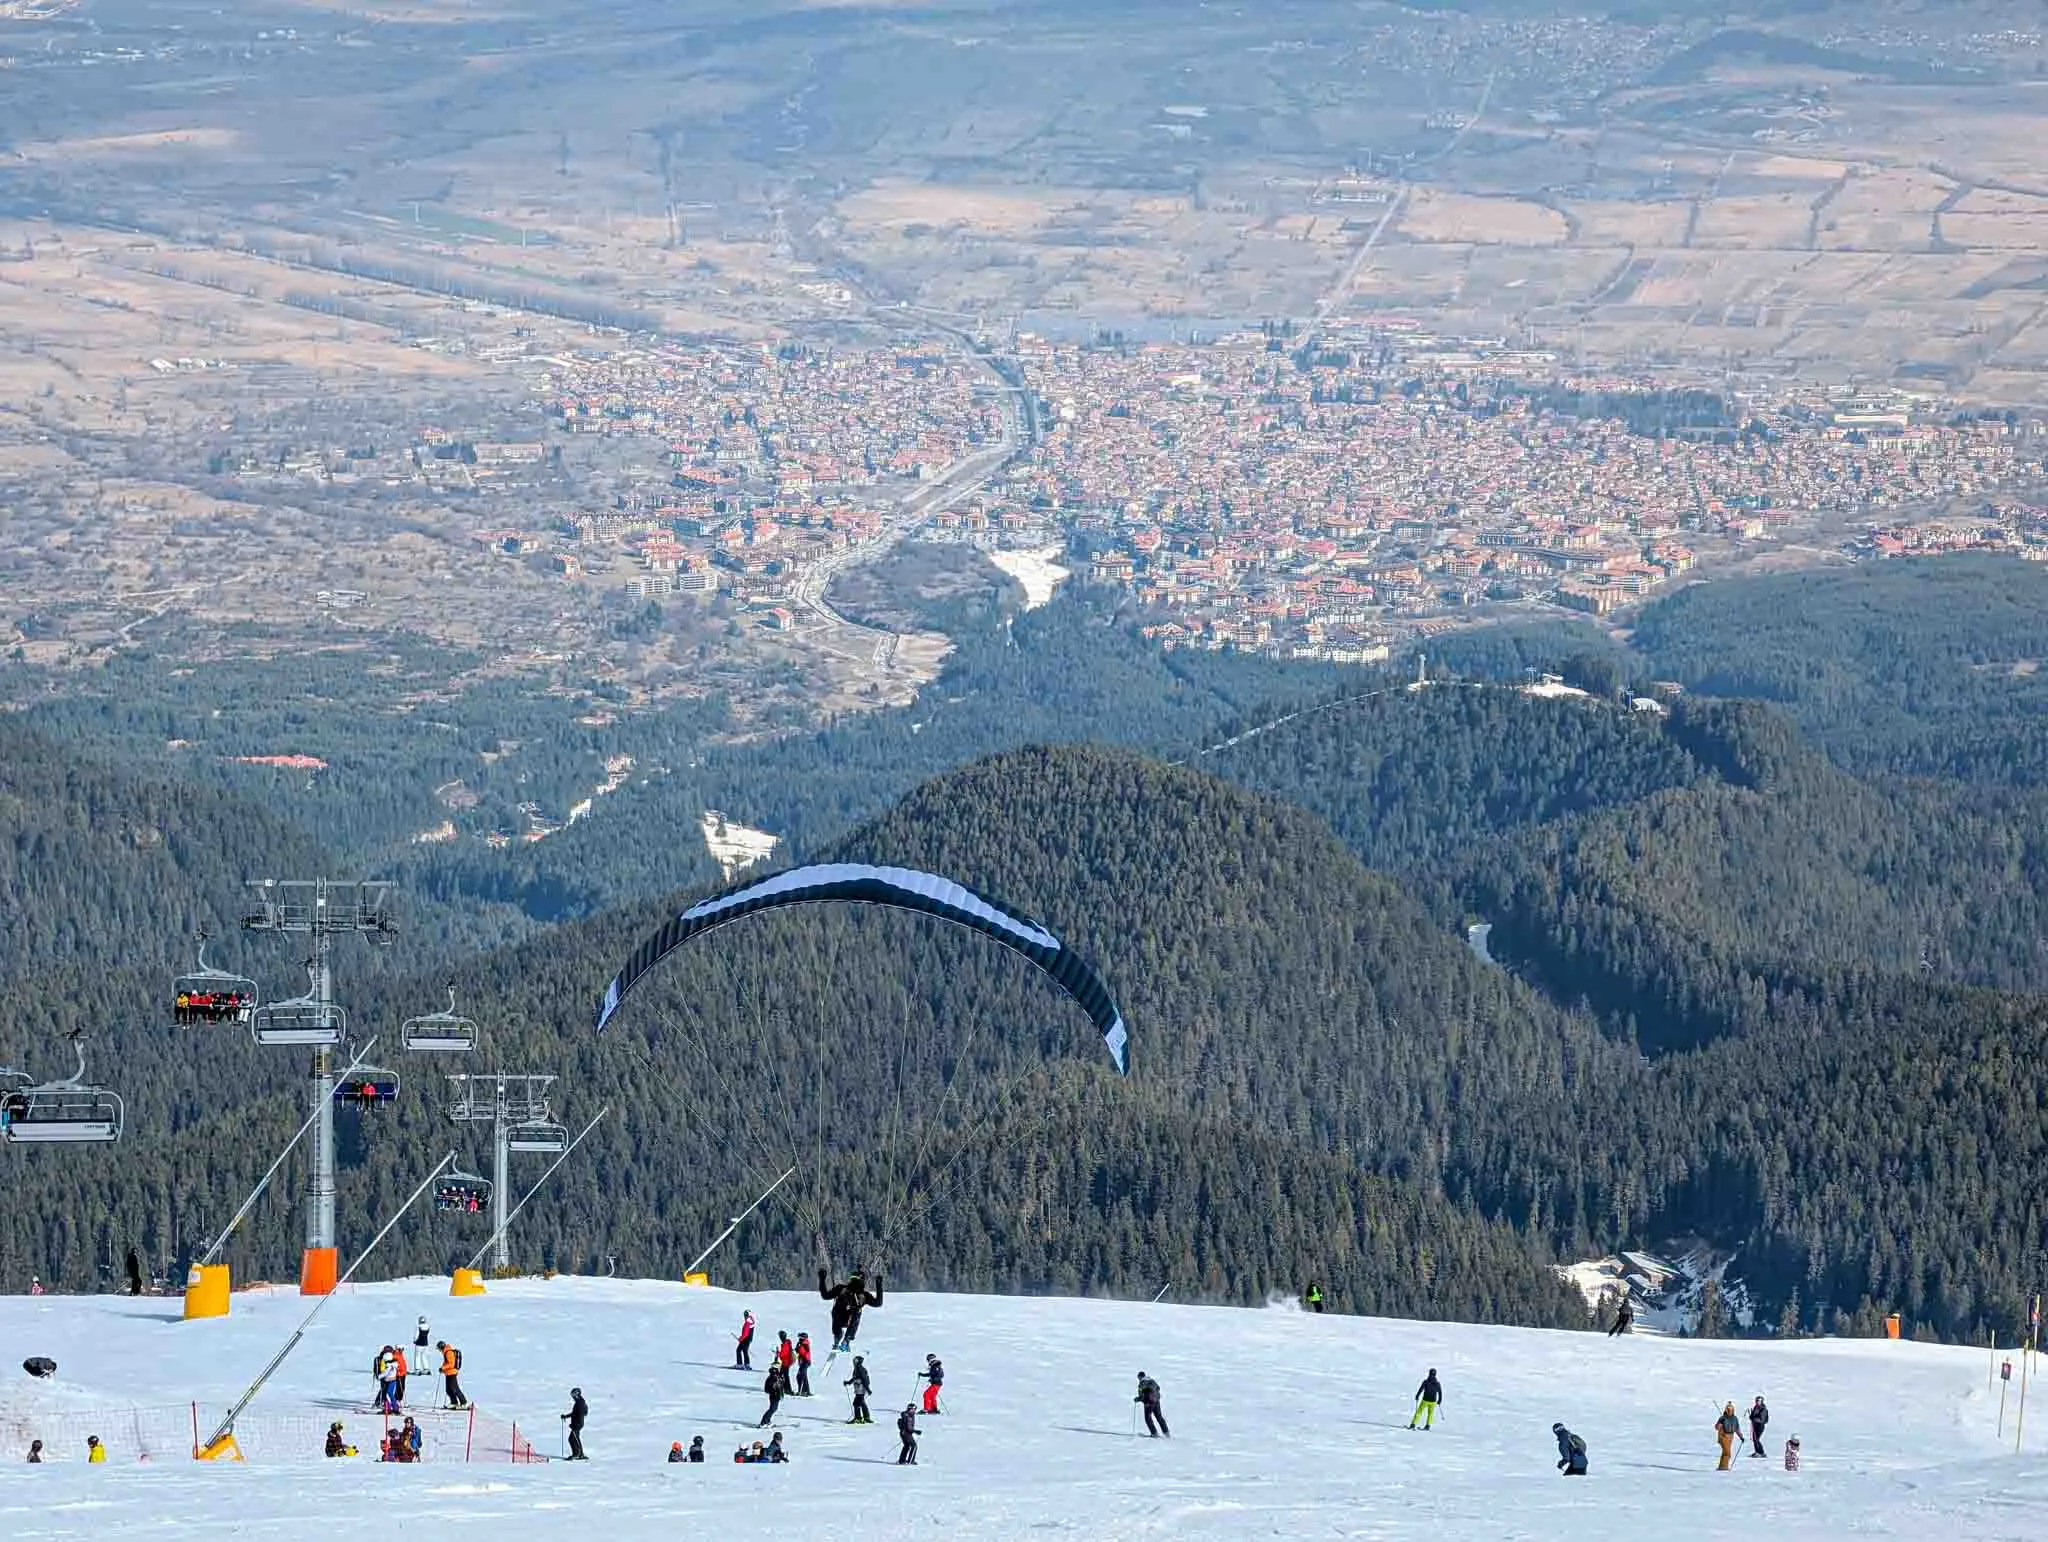 a paraglider takes off from a busy piste, the snowless valley the picture focus far below